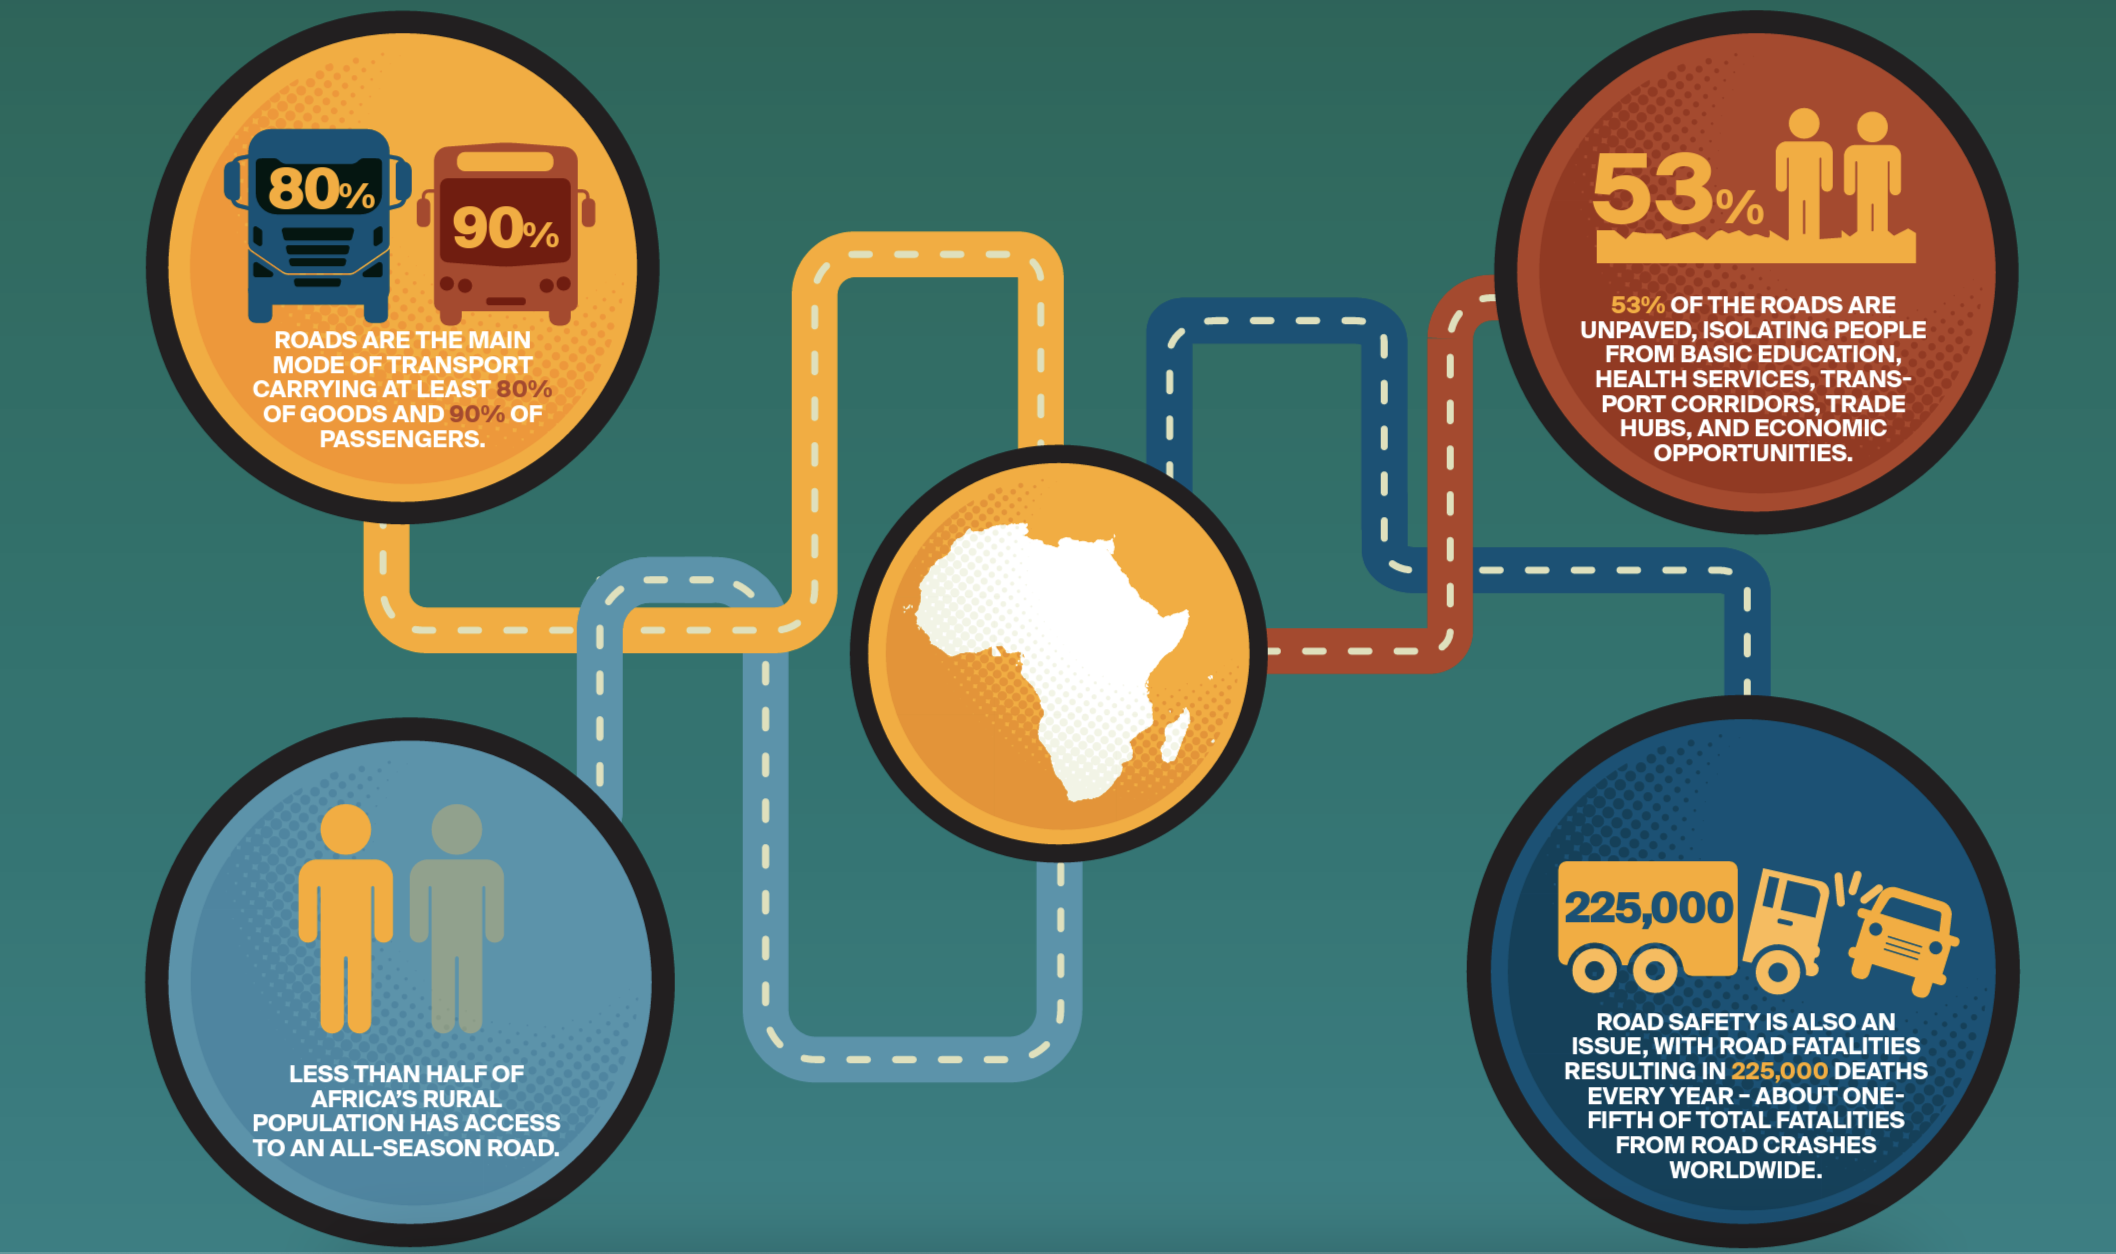 Africa's road infrastructure problem. Source: Knight Frank